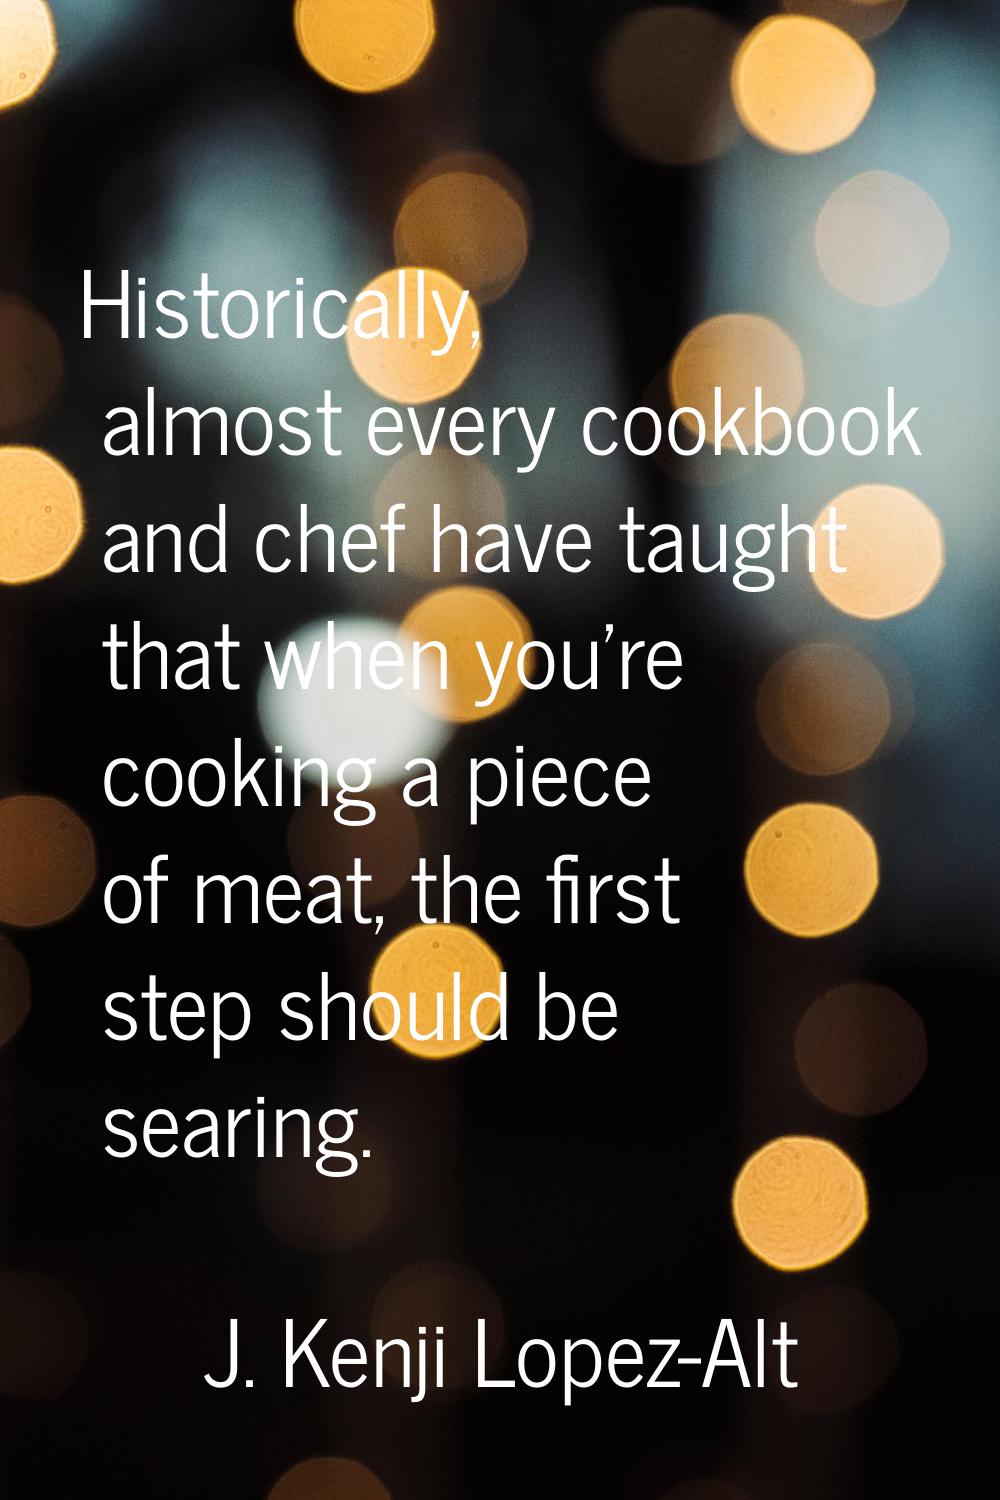 Historically, almost every cookbook and chef have taught that when you're cooking a piece of meat, 